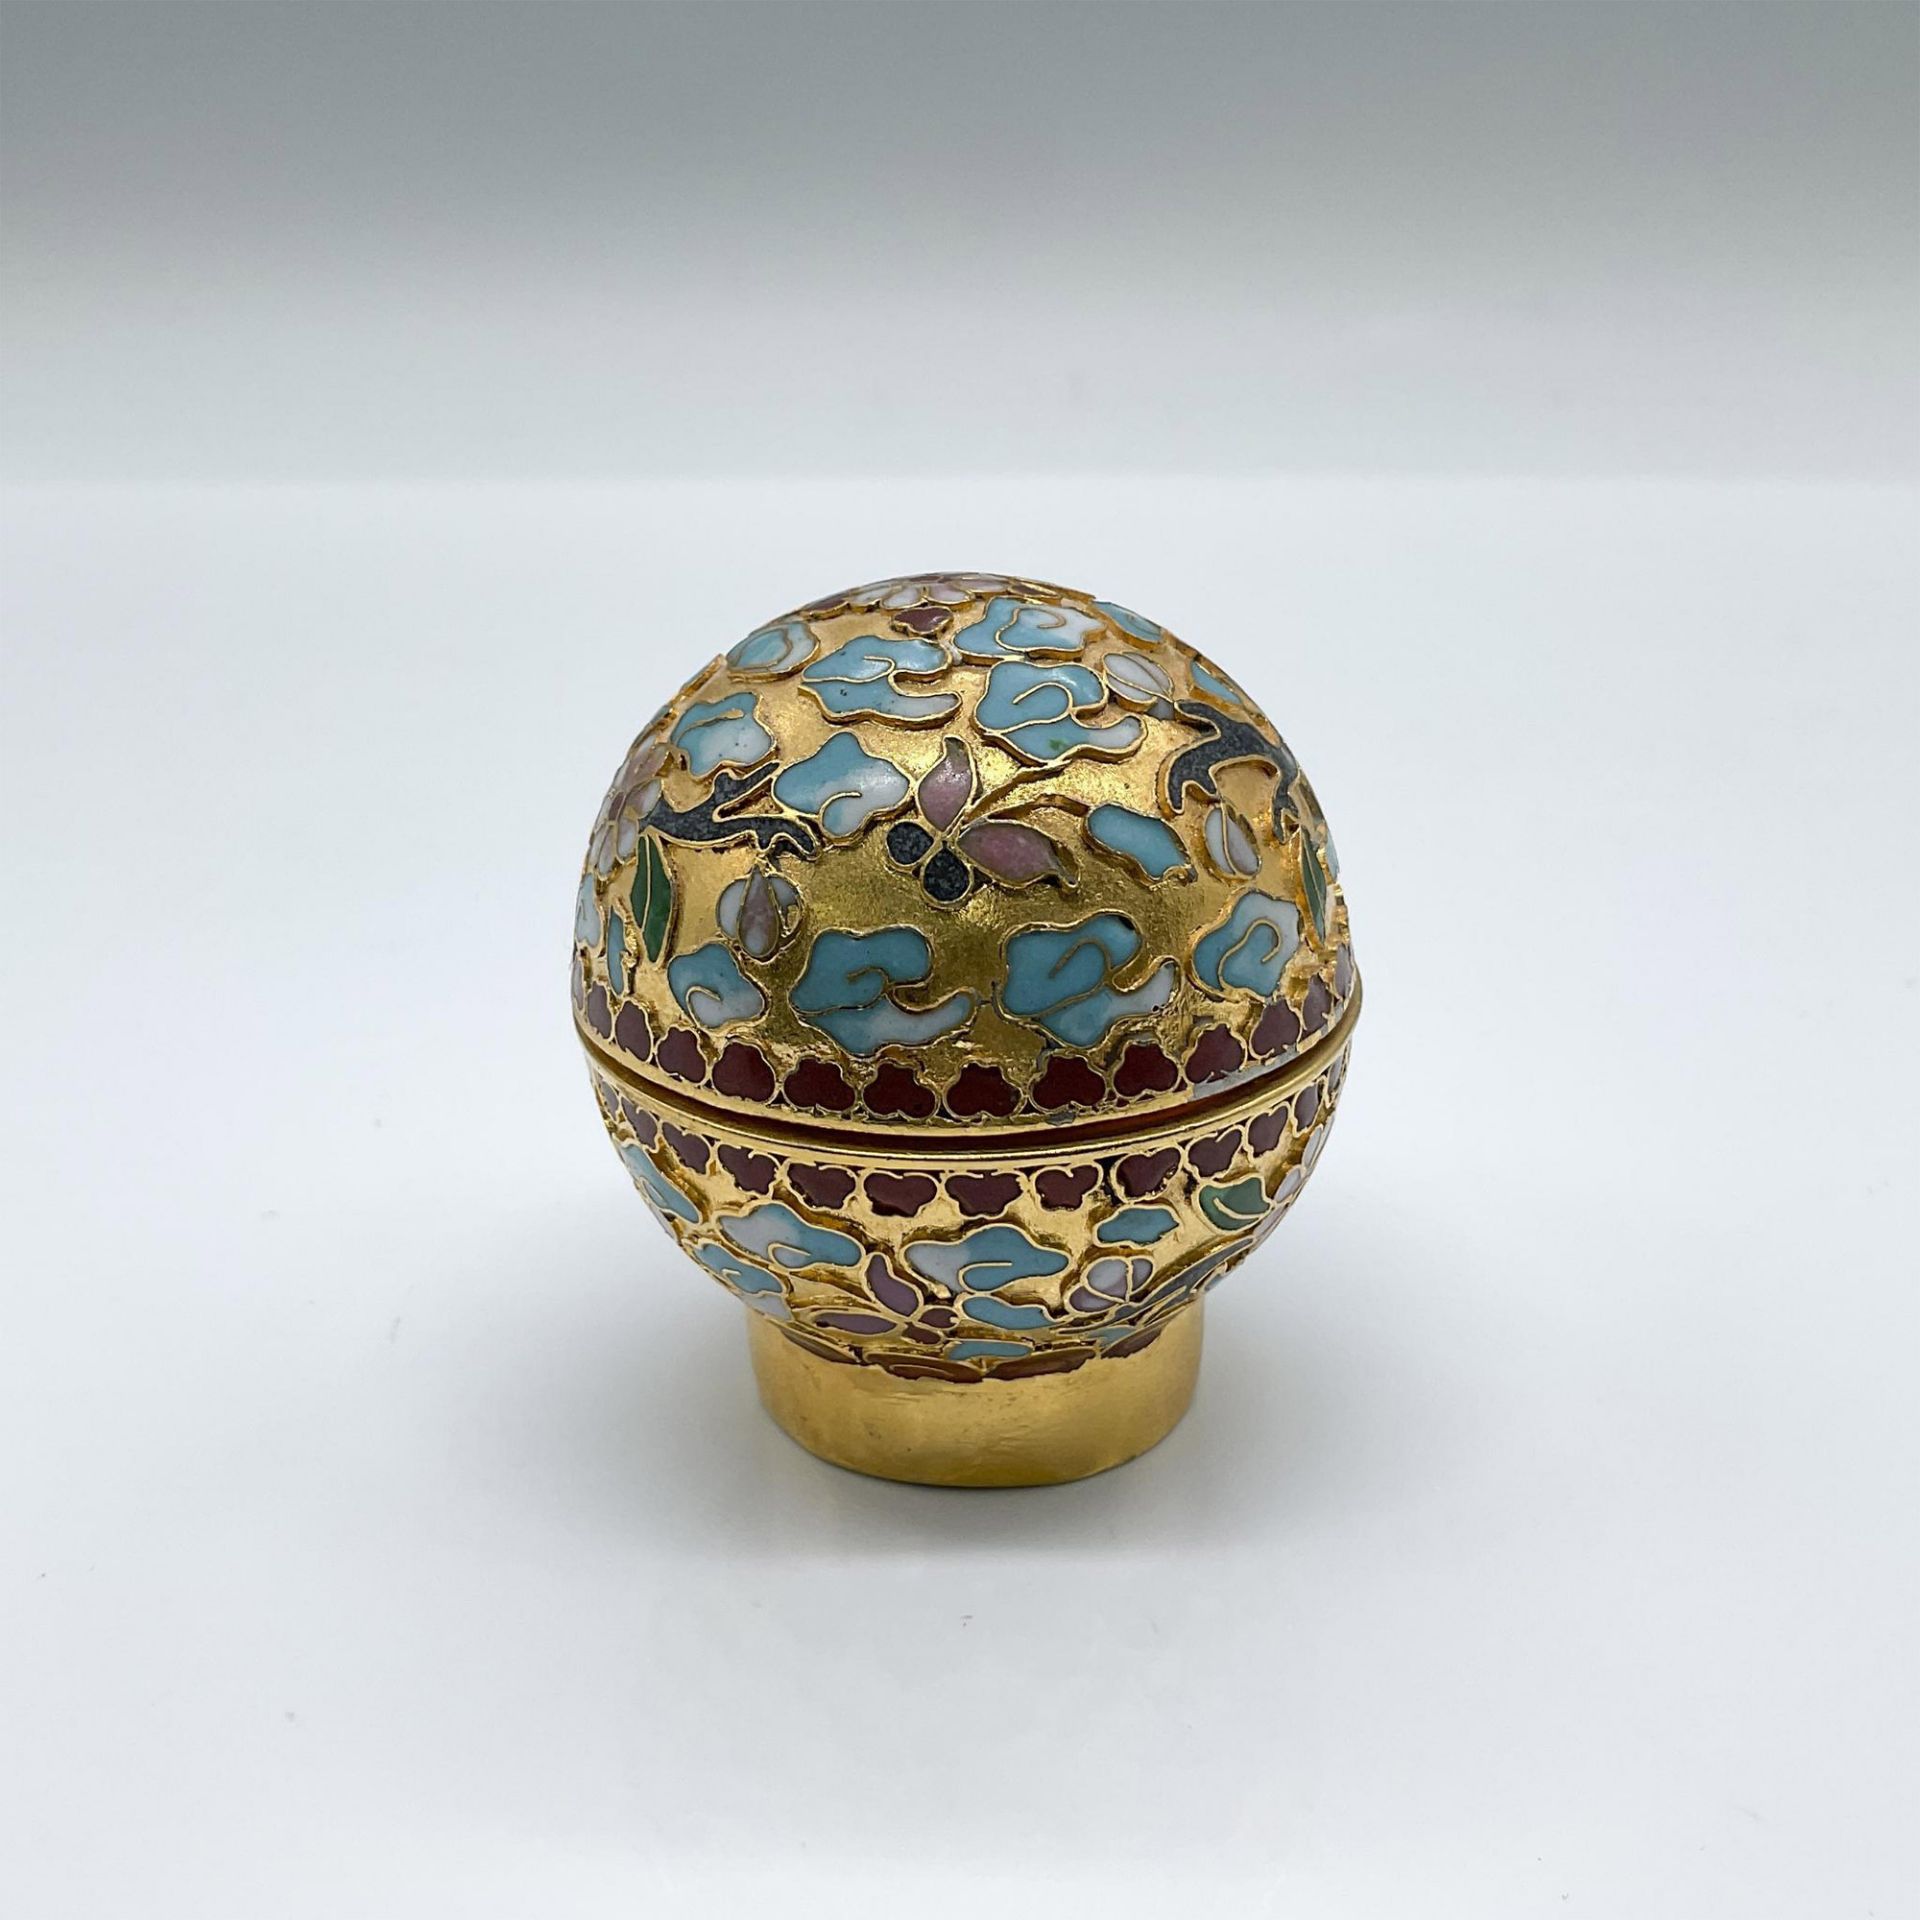 Chinese Floral Cloisonne Spherical Box - Image 2 of 4